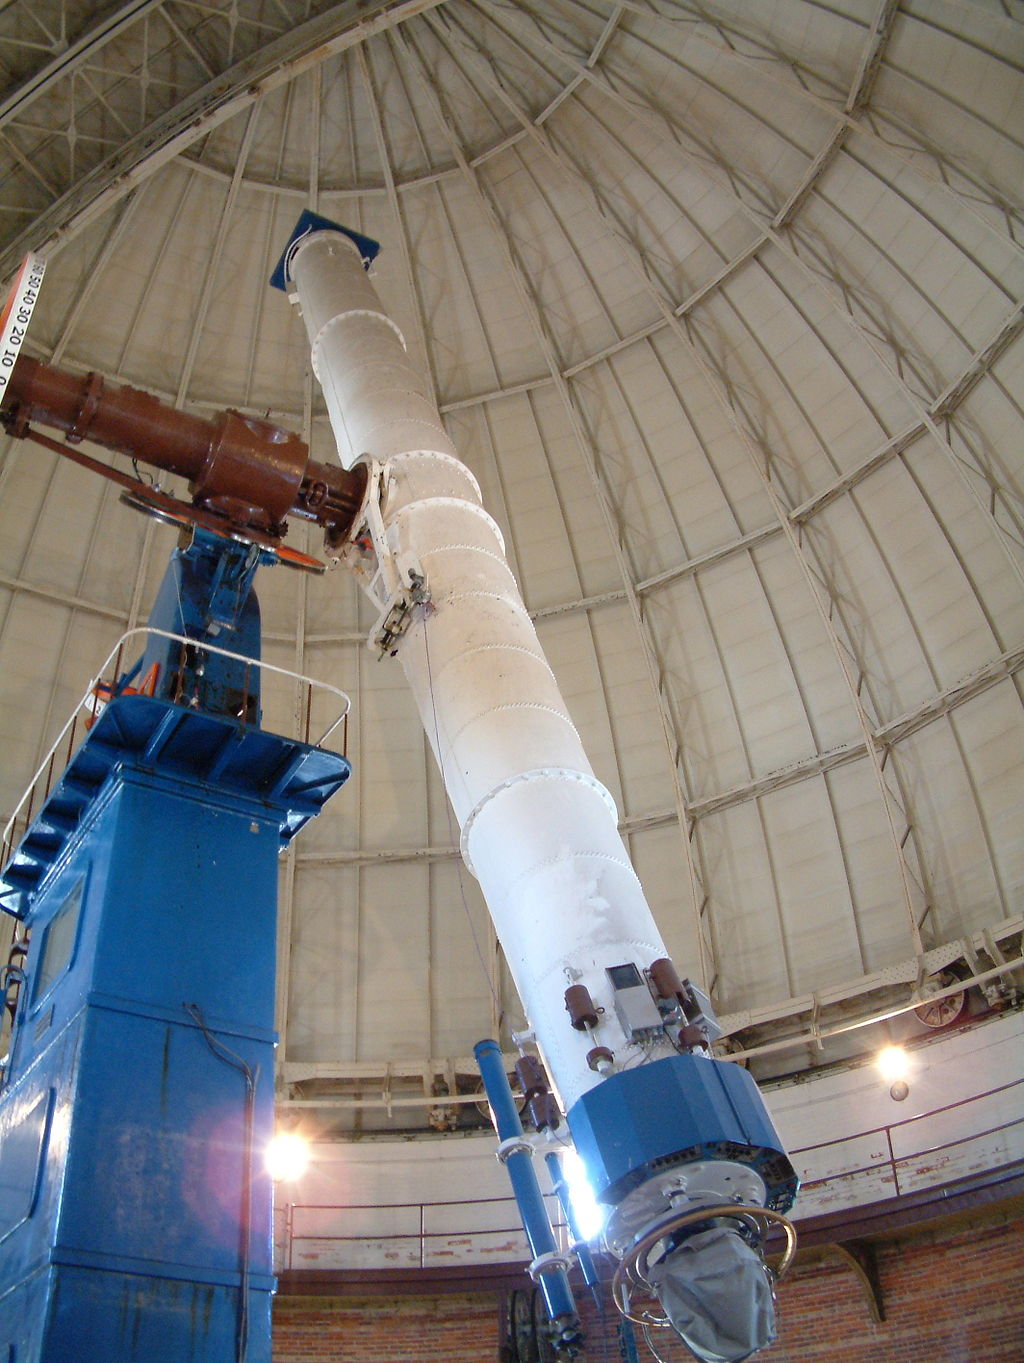 The 40-inch refracting telescope at Yerkes, the world's largest ever used for astronomy